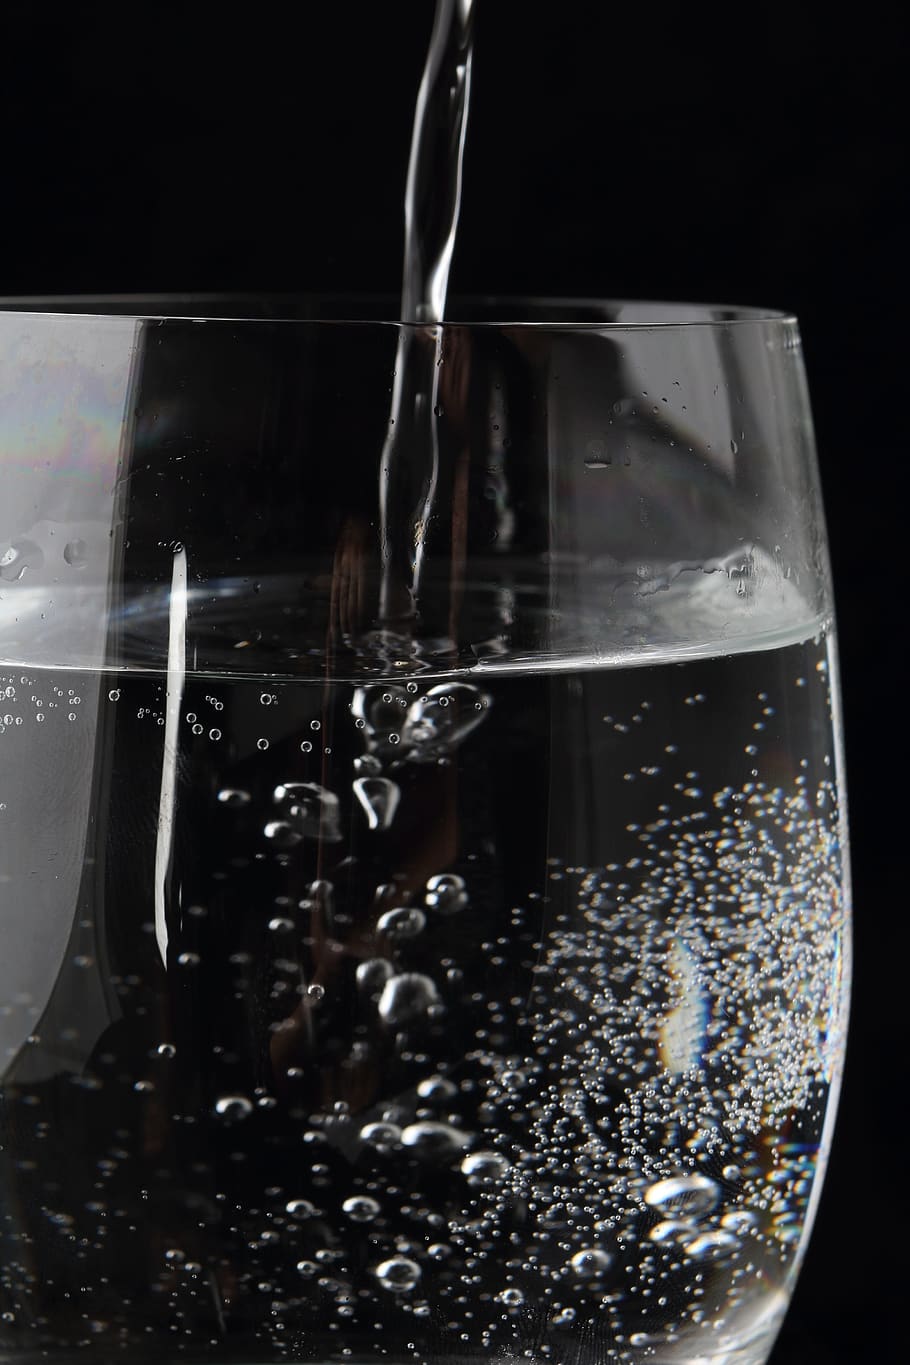 water glass, mineral water, glass, water, drink, refreshment, food and drink, close-up, household equipment, drinking glass